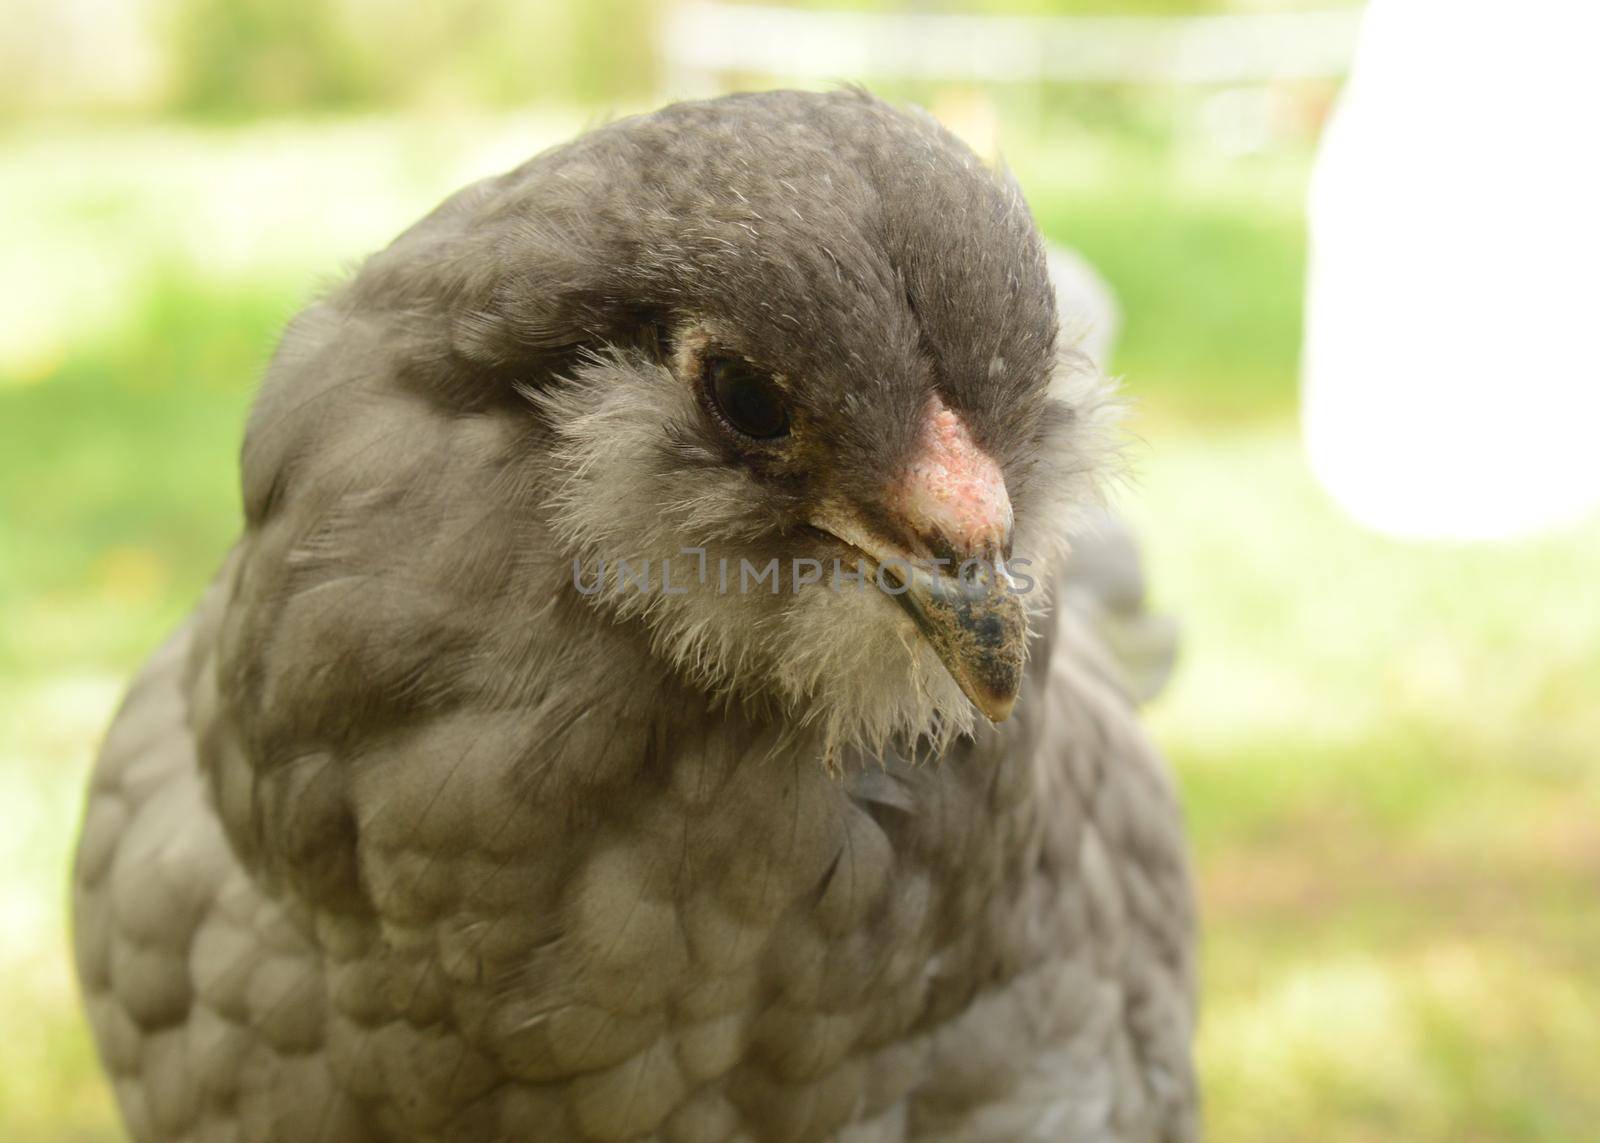 A young few month old chicken with gray feathers curious about the camera during the daytime hours.